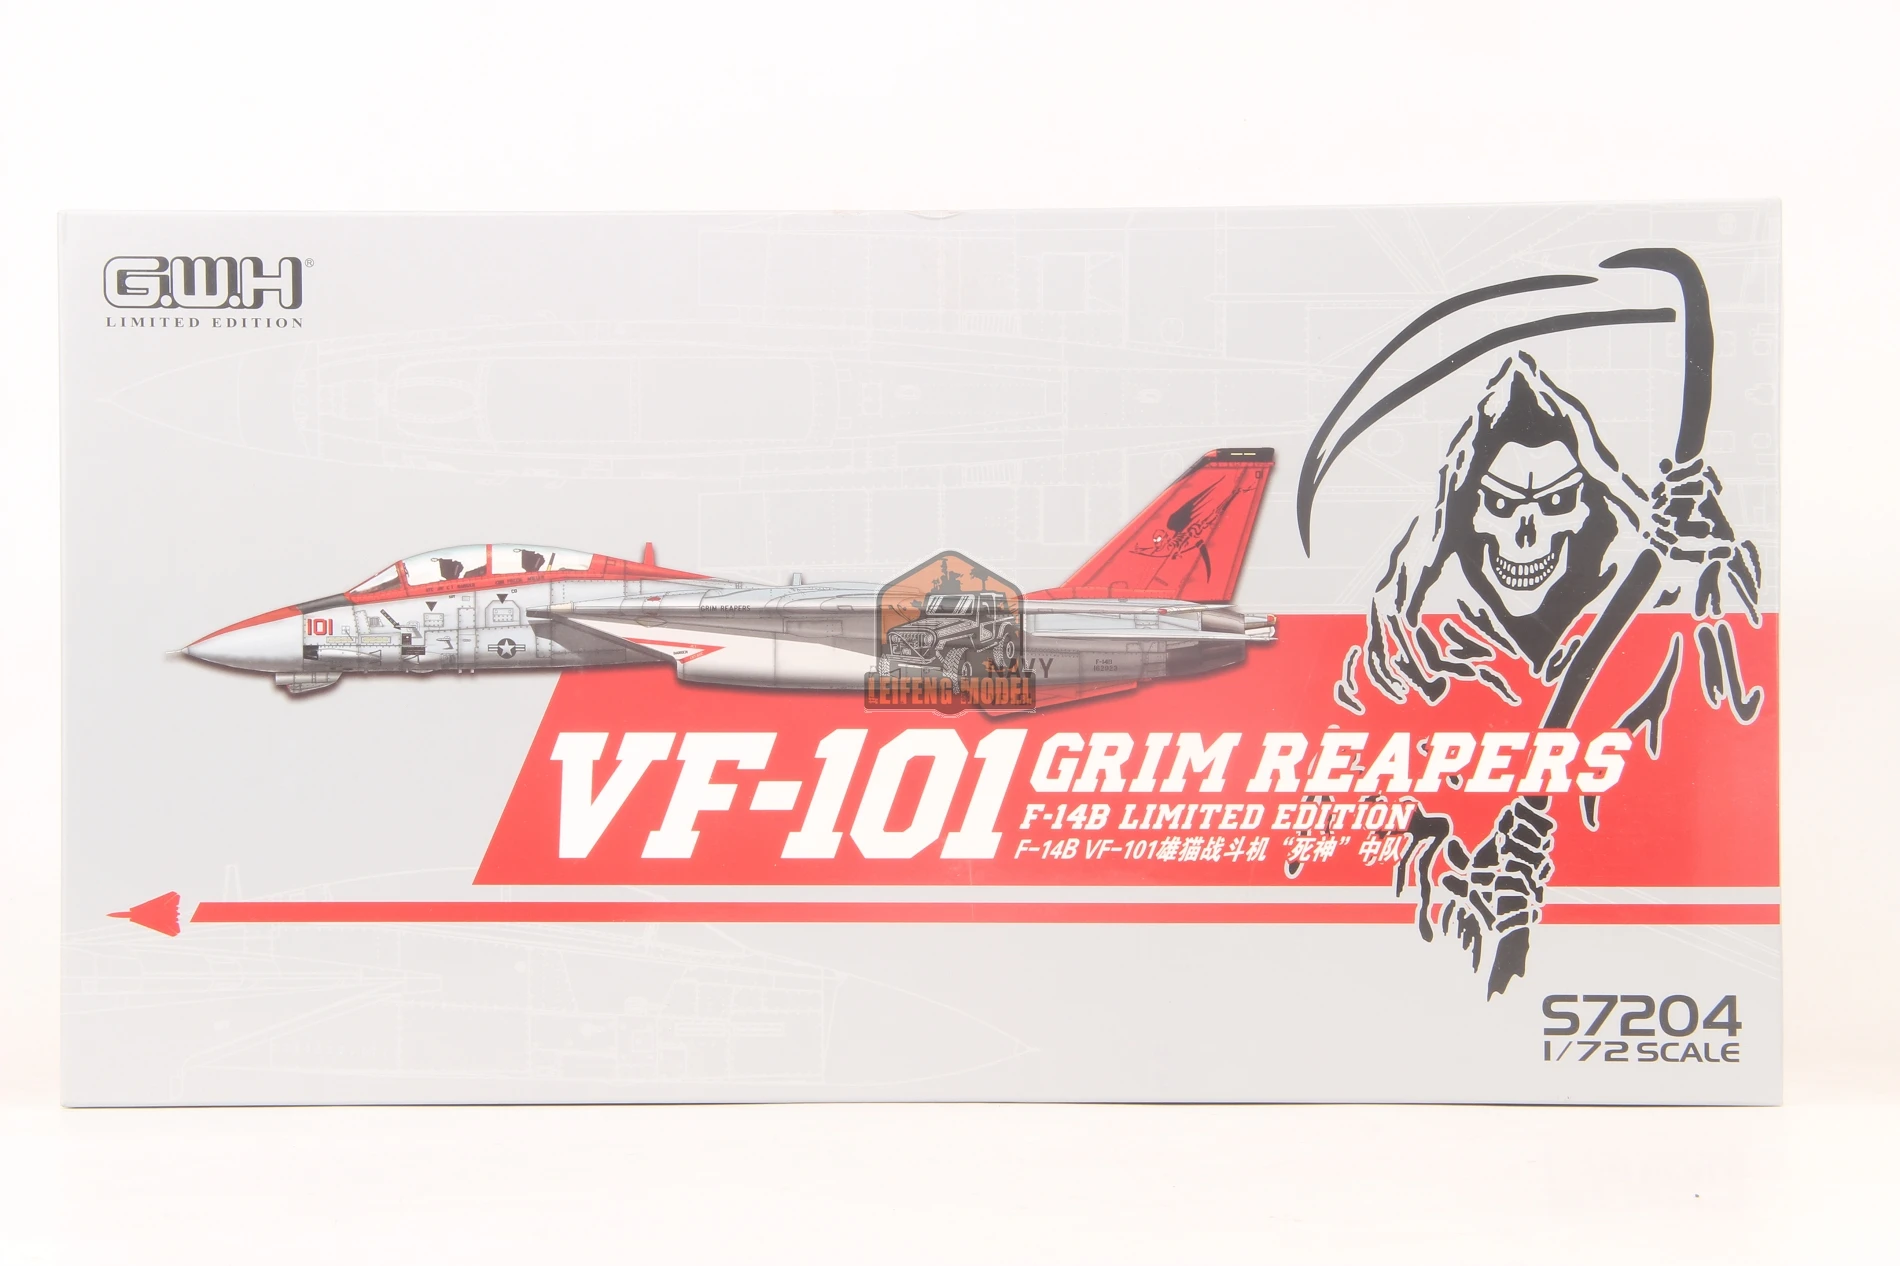 

Great Wall Hobby S7204 1/72 U.S. F-14B VF-101 Grim Reapers - Limited Edition Model Kit